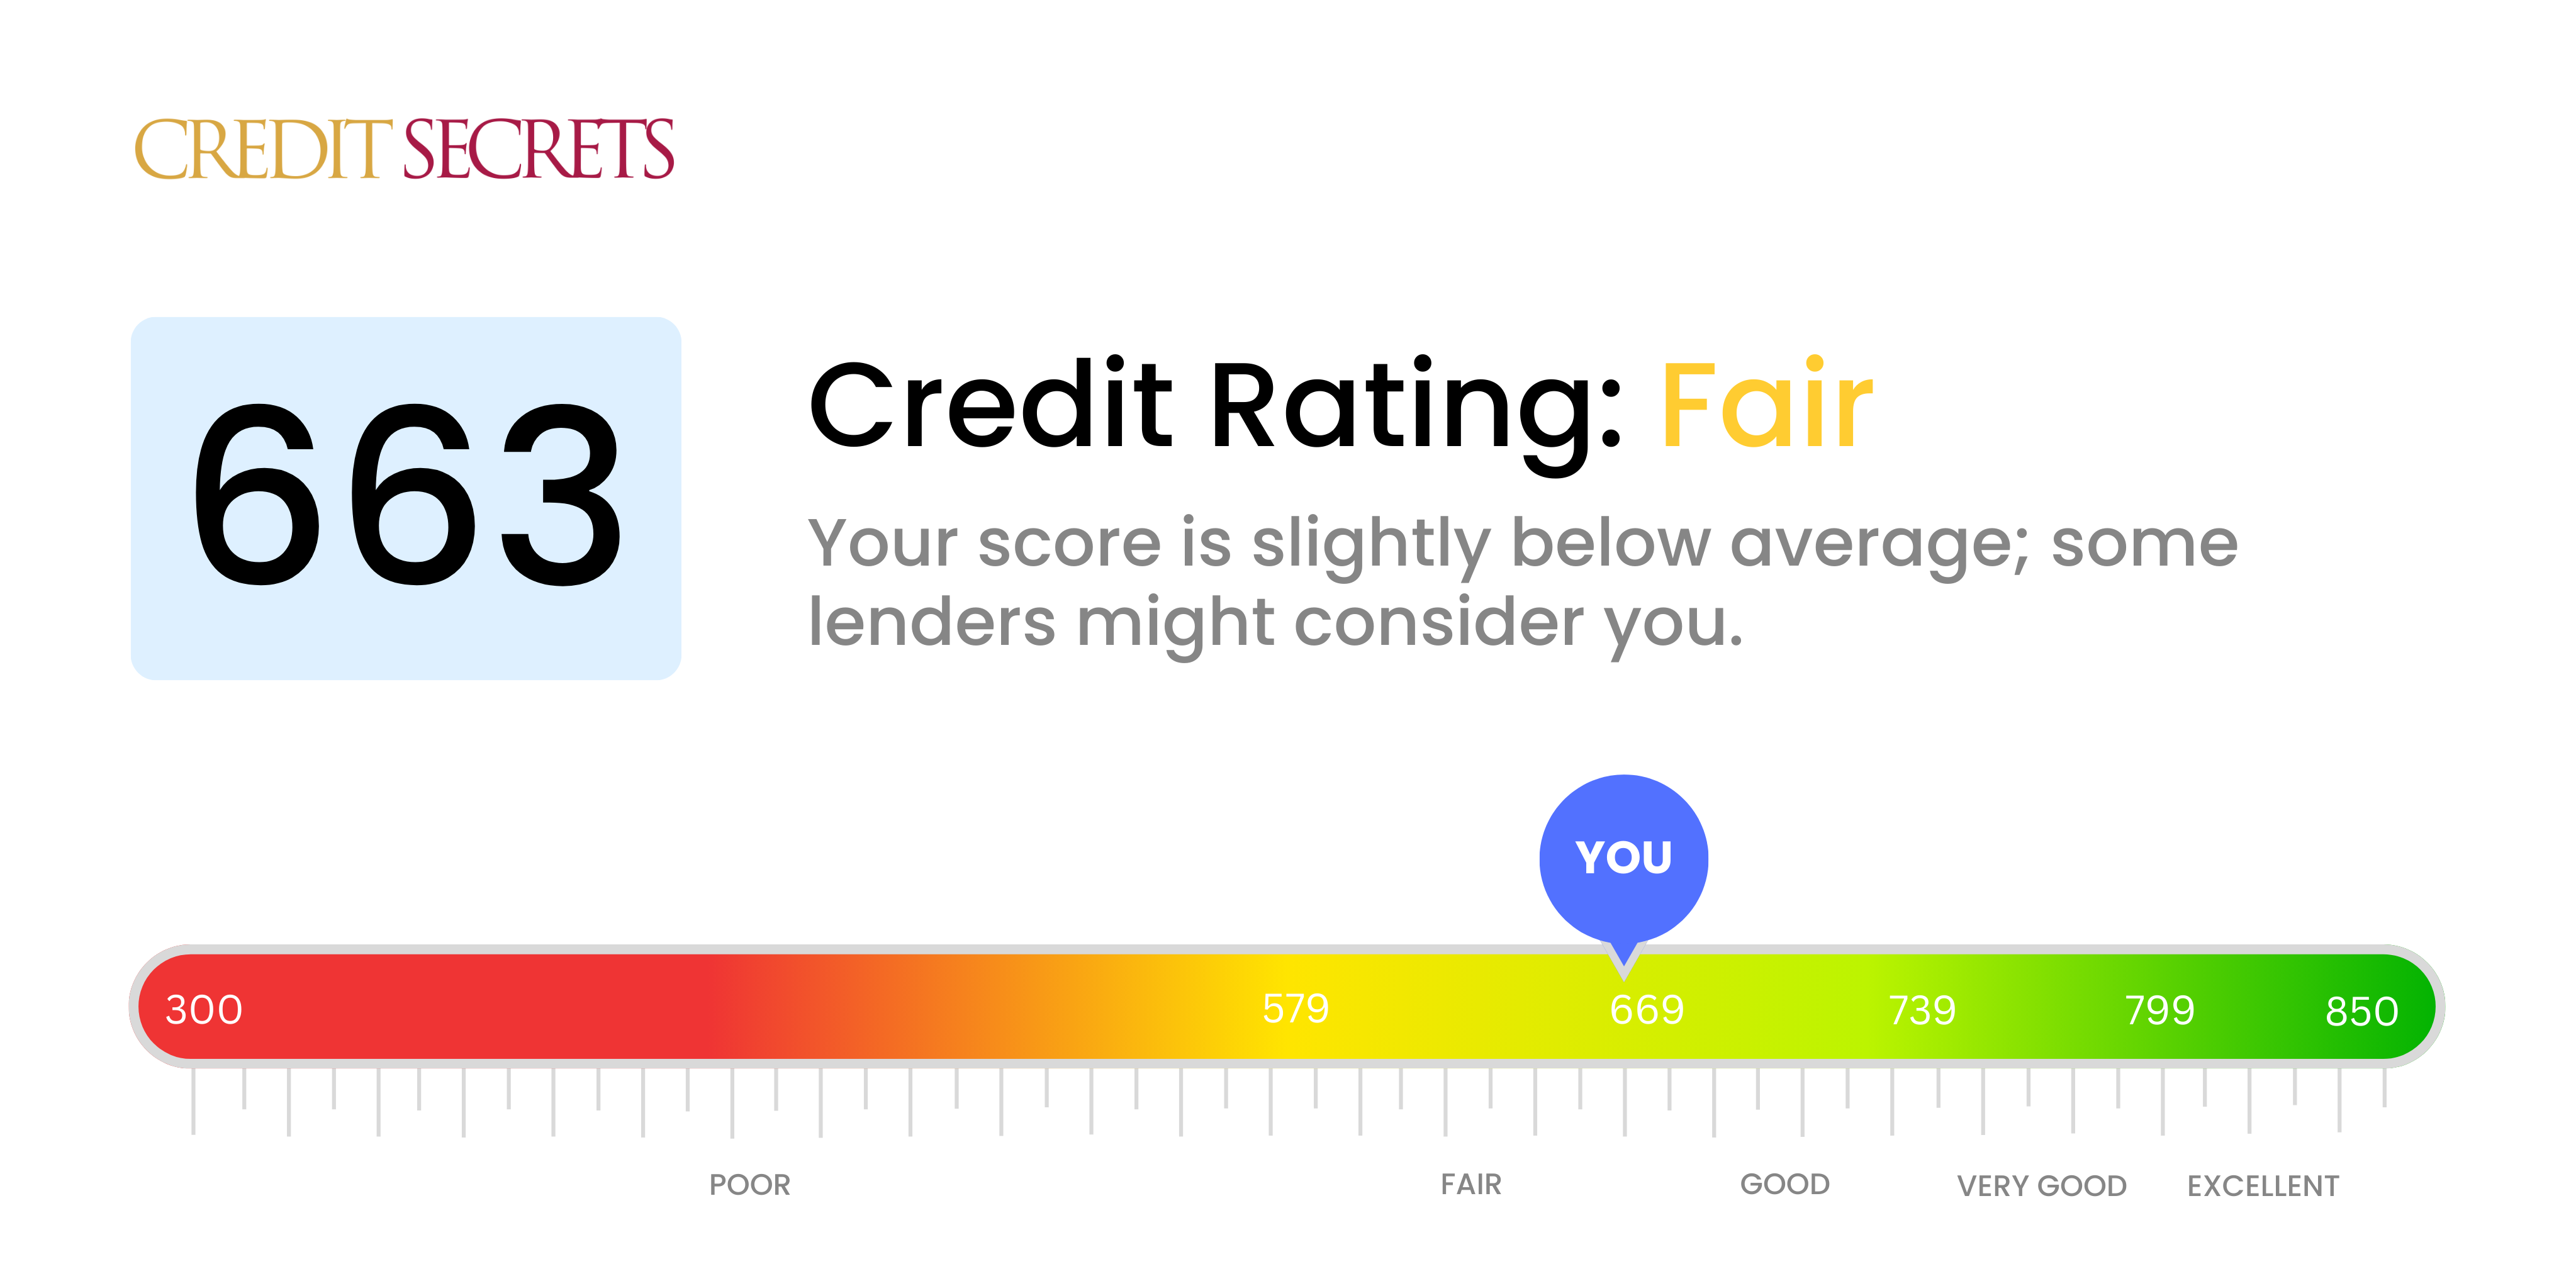 Is 663 a good credit score?